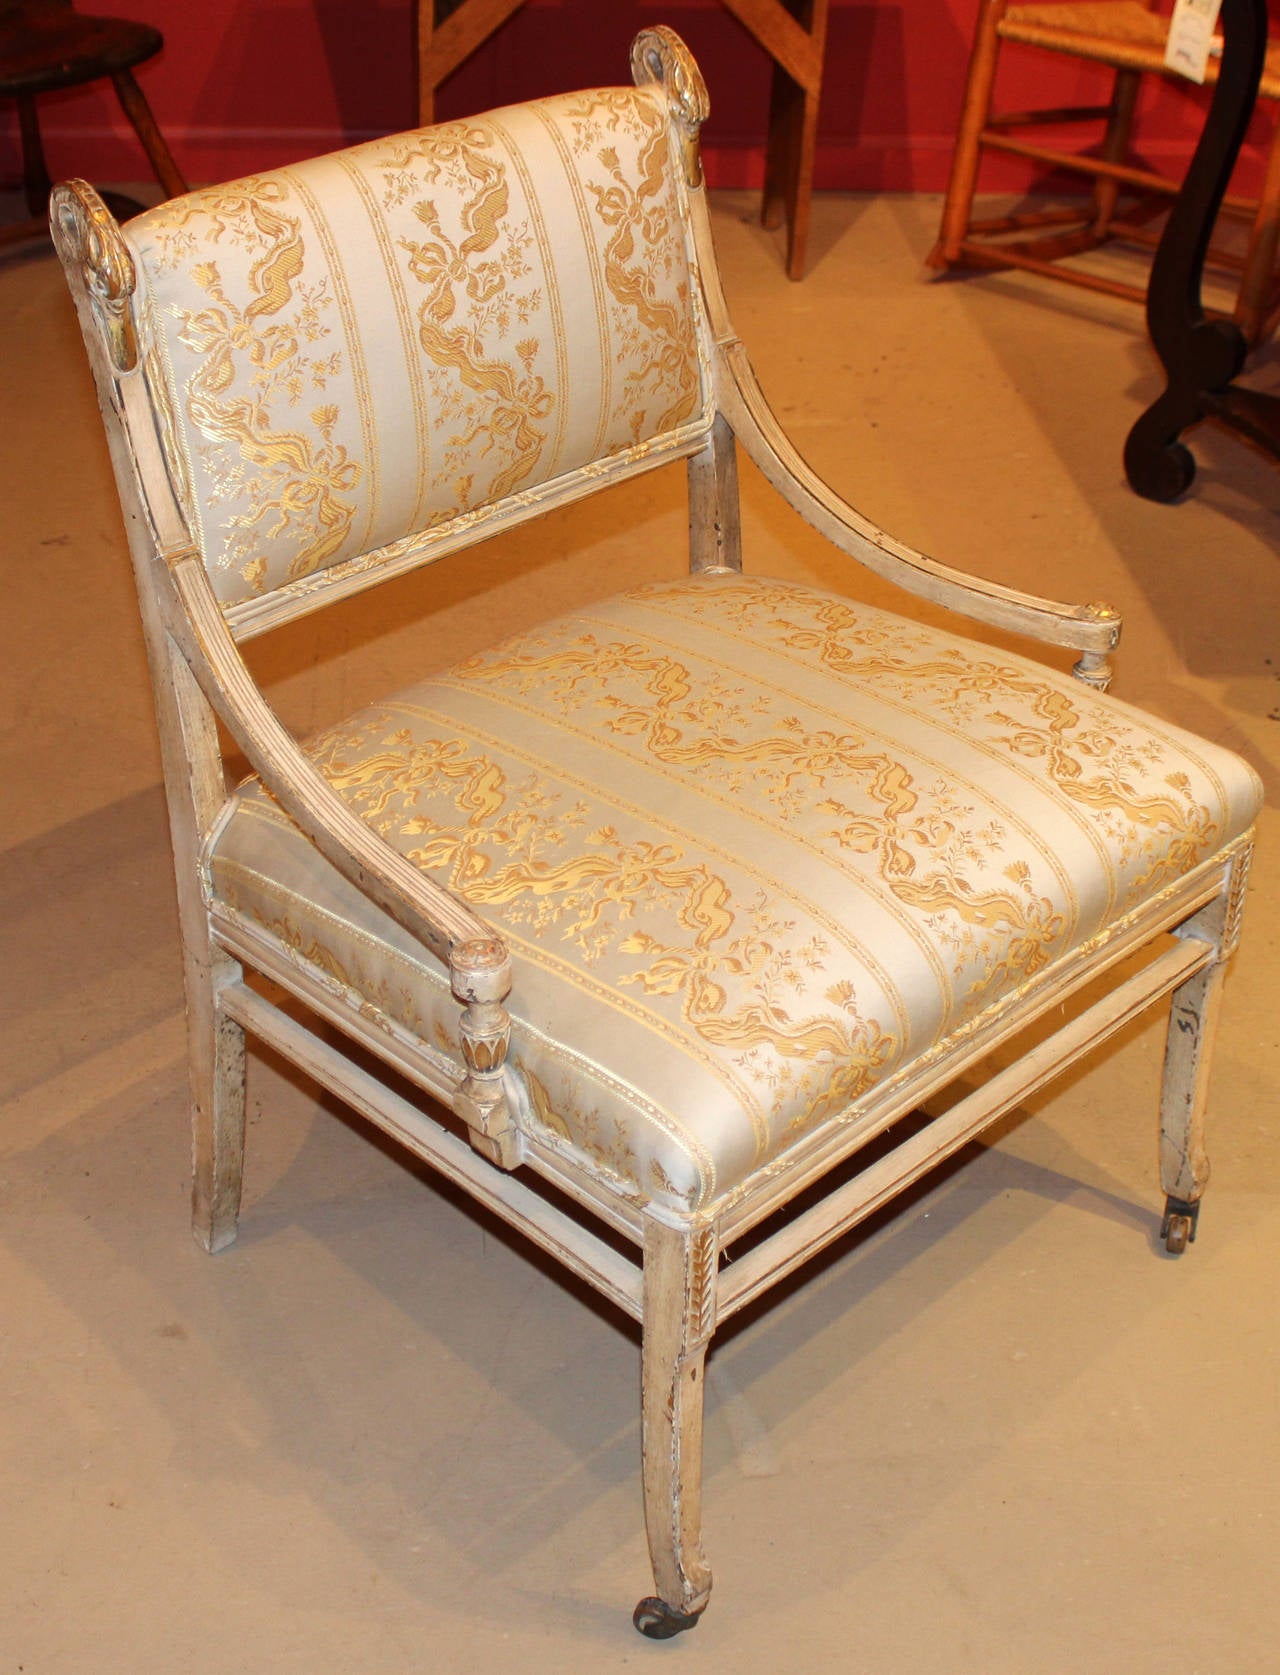 A fine example of an early 19th century French style upholstered side chair with carved swan heads, painted and gilt surface, and low arms. Provenance: Possibly from the Vanderbilt suite.